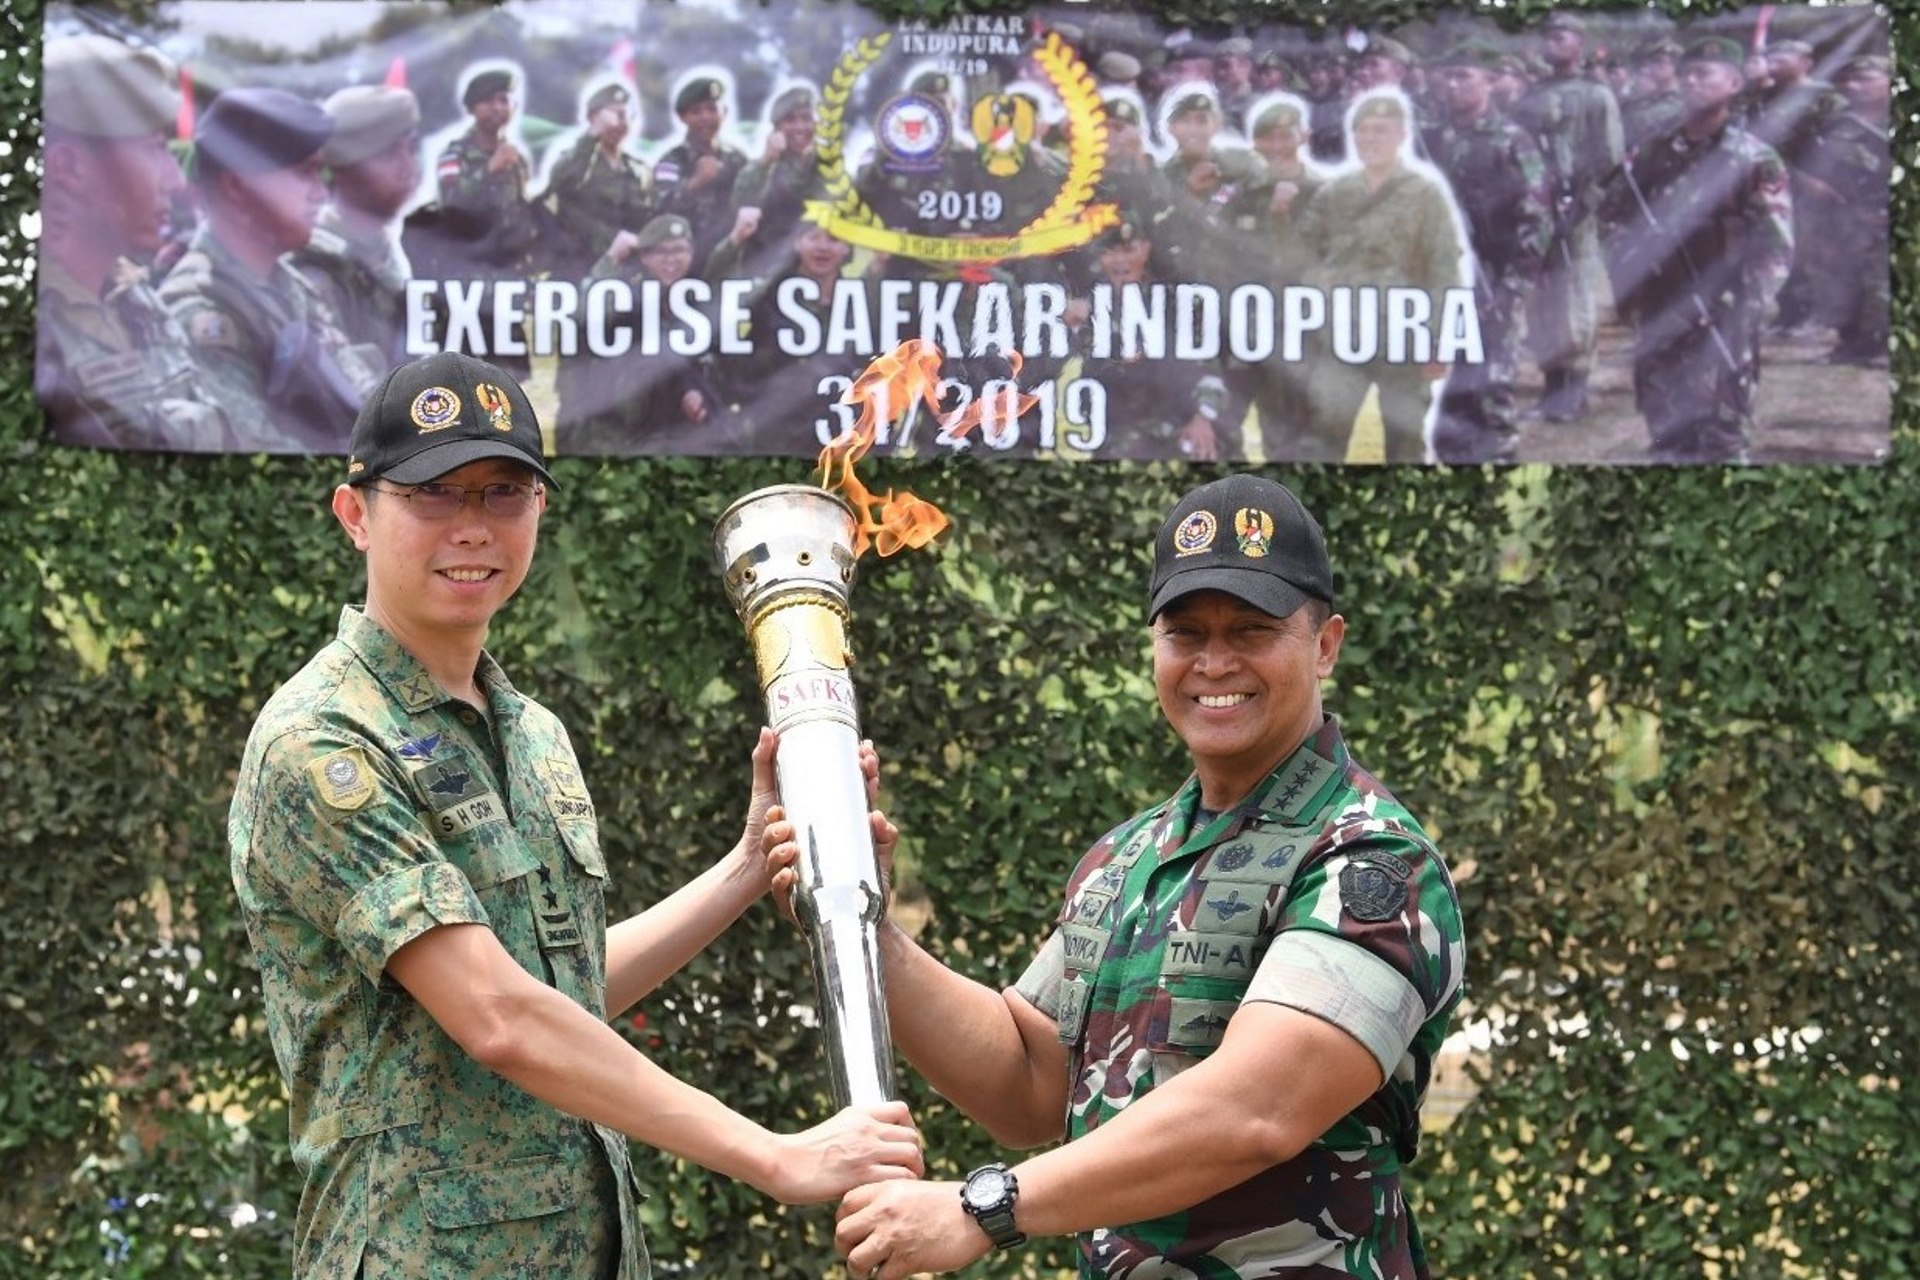 Chief of Army Major-General Goh Si Hou (left) and Chief of Staff of the Indonesian Army General Andika Perkasa (right) co-officiating at the closing ceremony of this year’s Exercise Safkar Indopura.